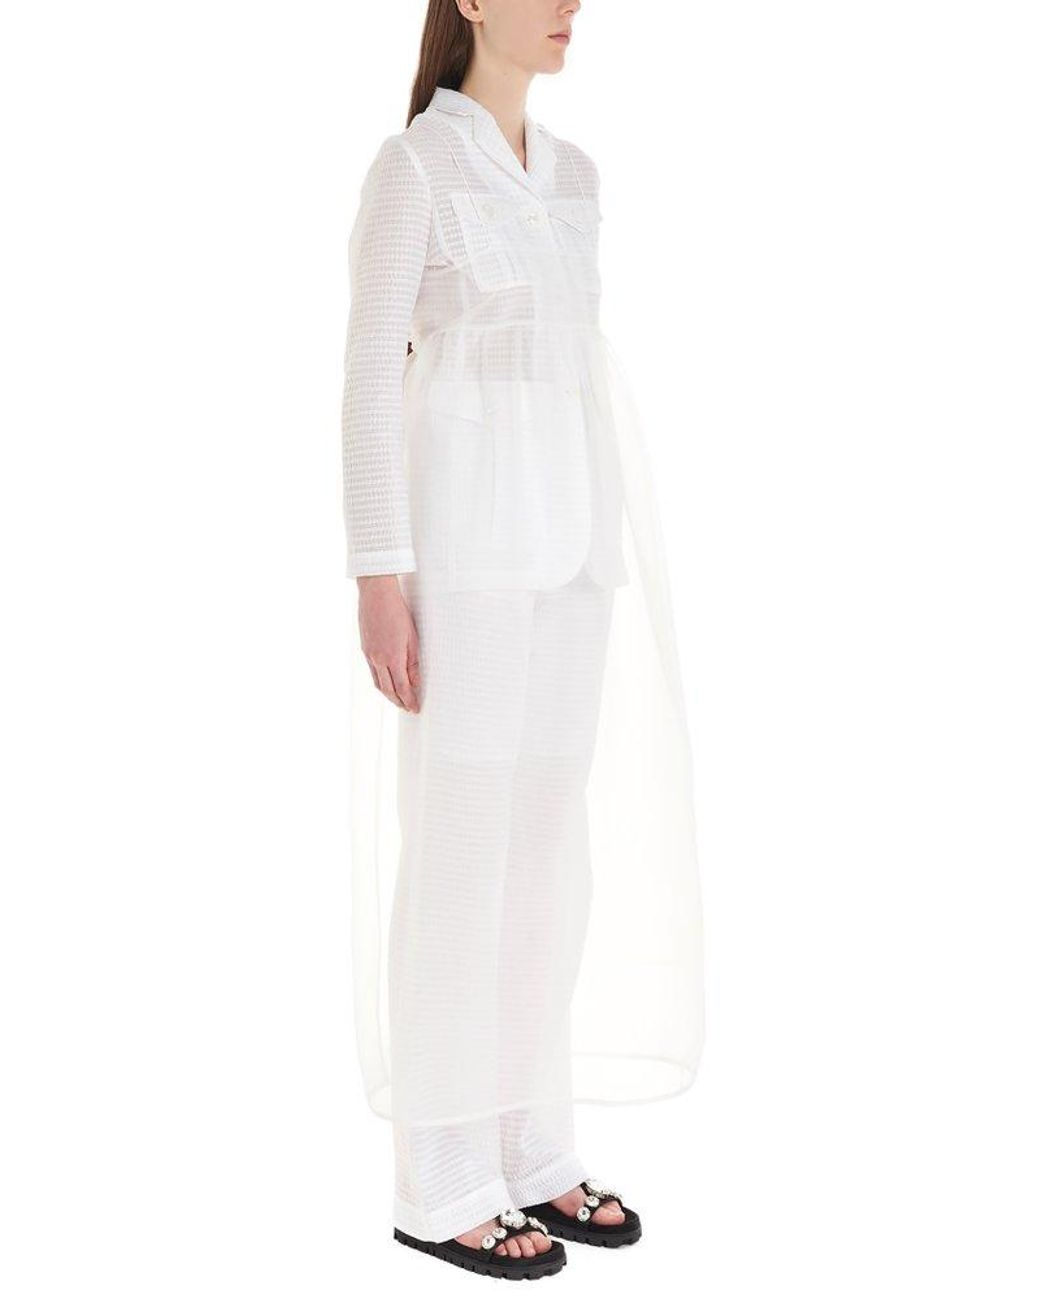 Cecilie Bahnsen Synthetic Kamille Sheer Dress in White | Lyst